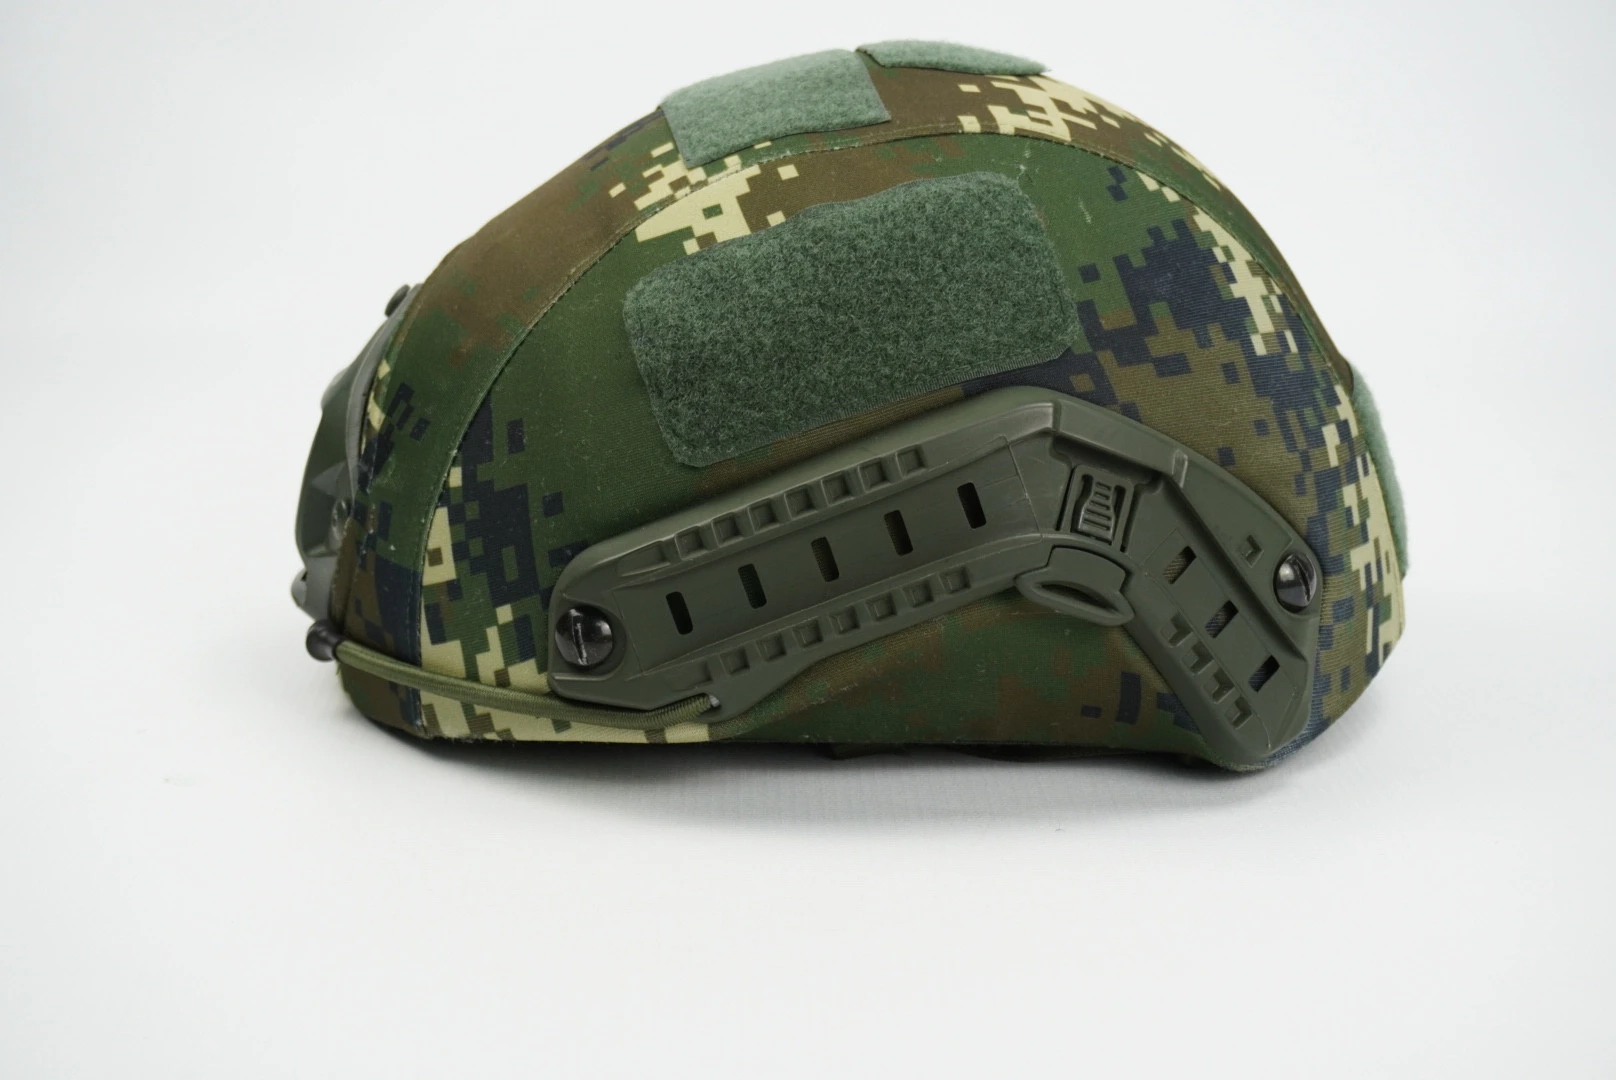 Tactical Army Military Airsoft Pilot Paintball Bullet Proof Helmet